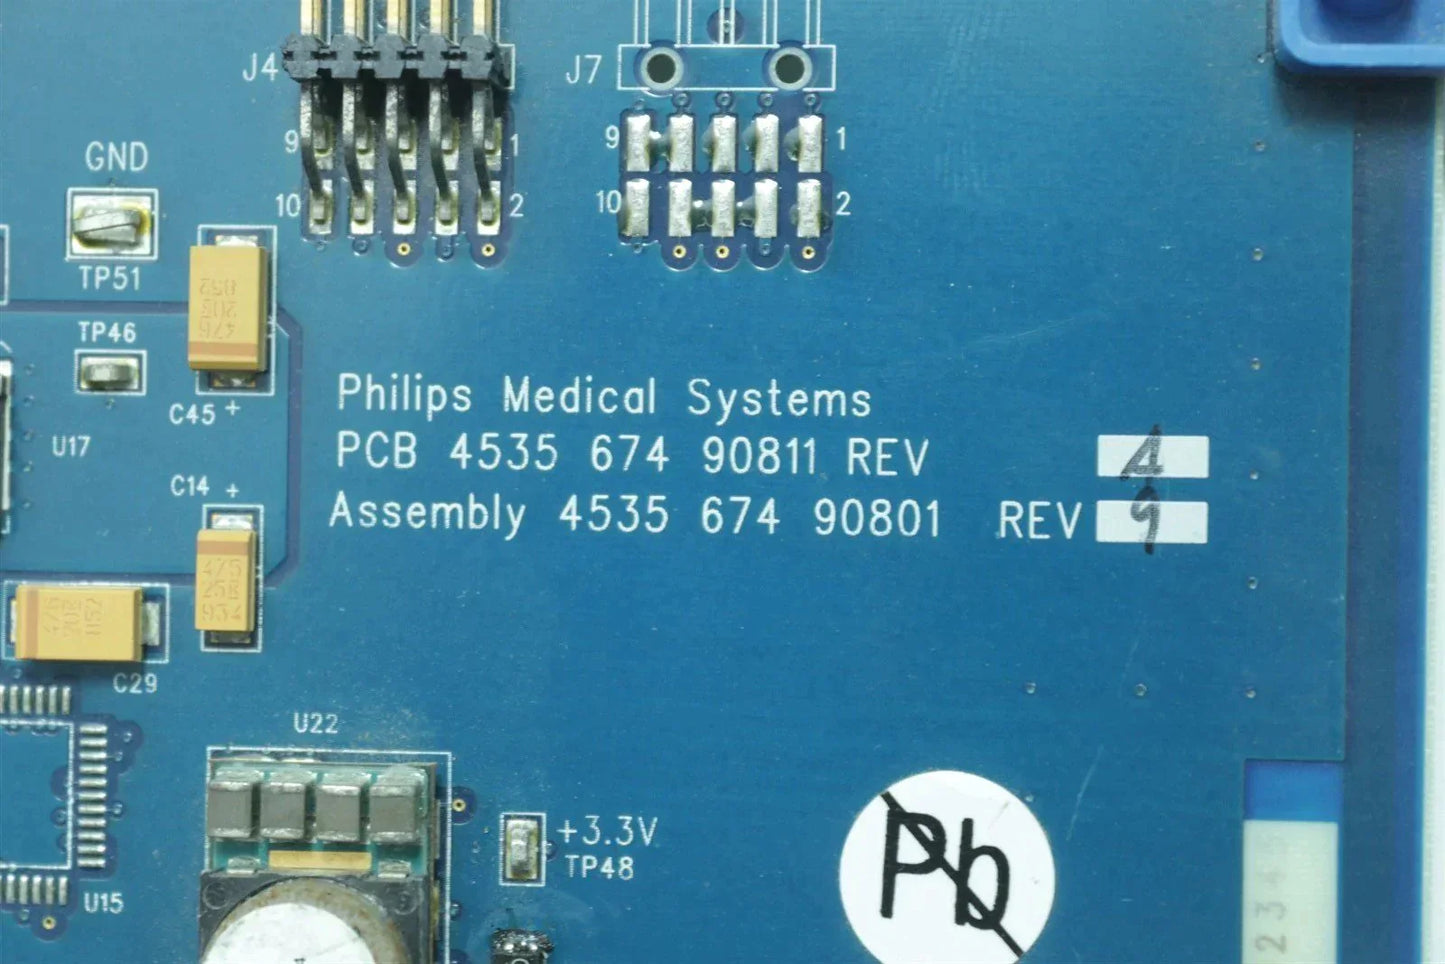 Philips Medical Systems PCB 4535 674 90811 Rev A 4535 674 90801 REV 9 Assembly